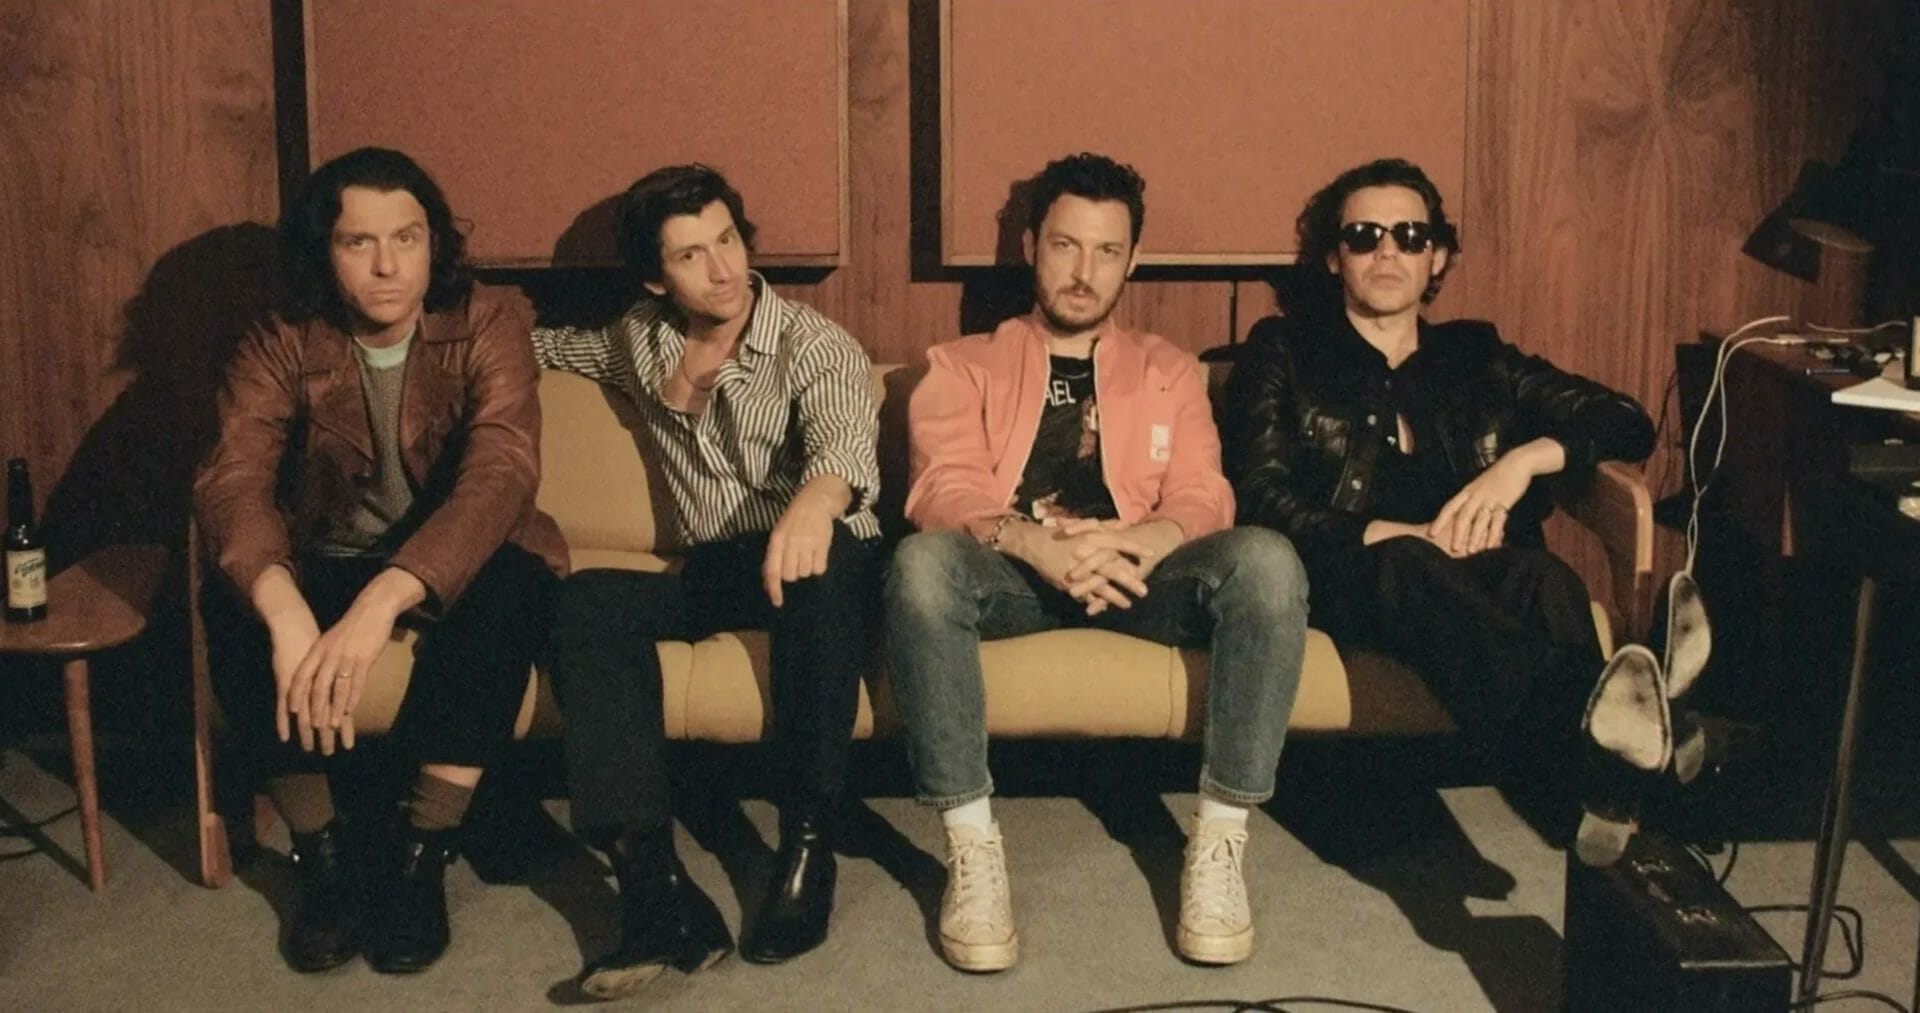 Watch: Arctic Monkeys Share TV Debut of “Body Paint” on ‘Fallon’